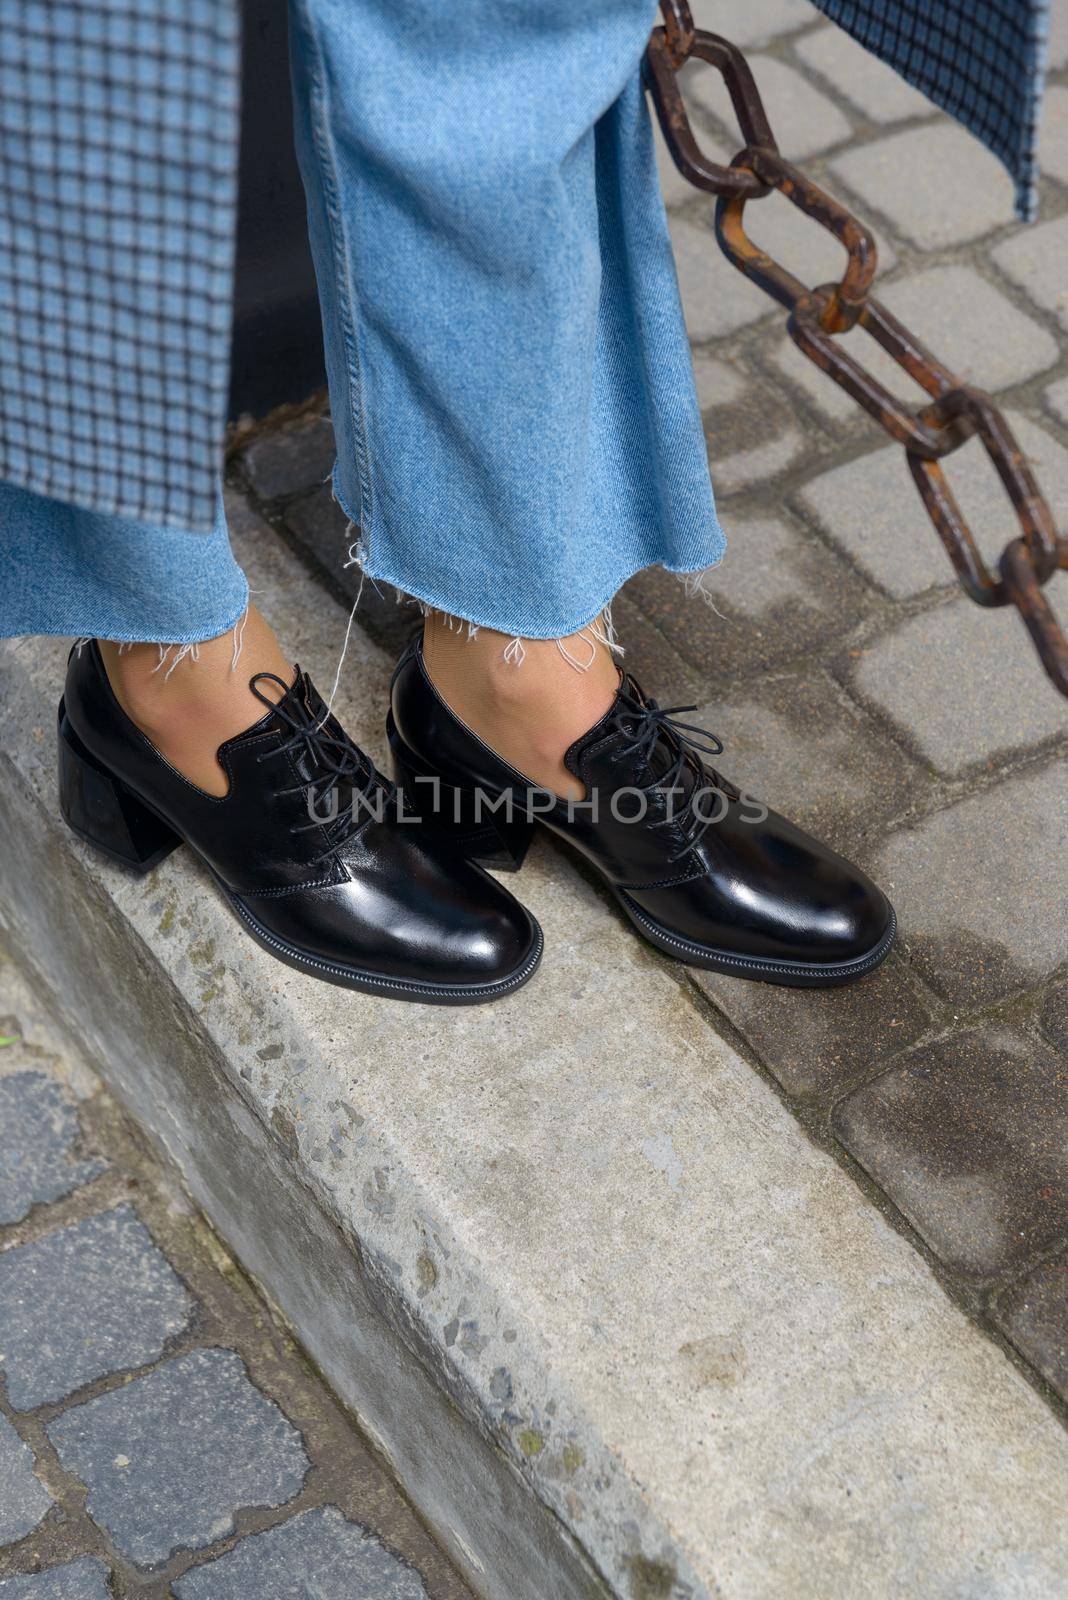 Women's leather boots close-up. The girl walks in black shiny oxford style shoes.